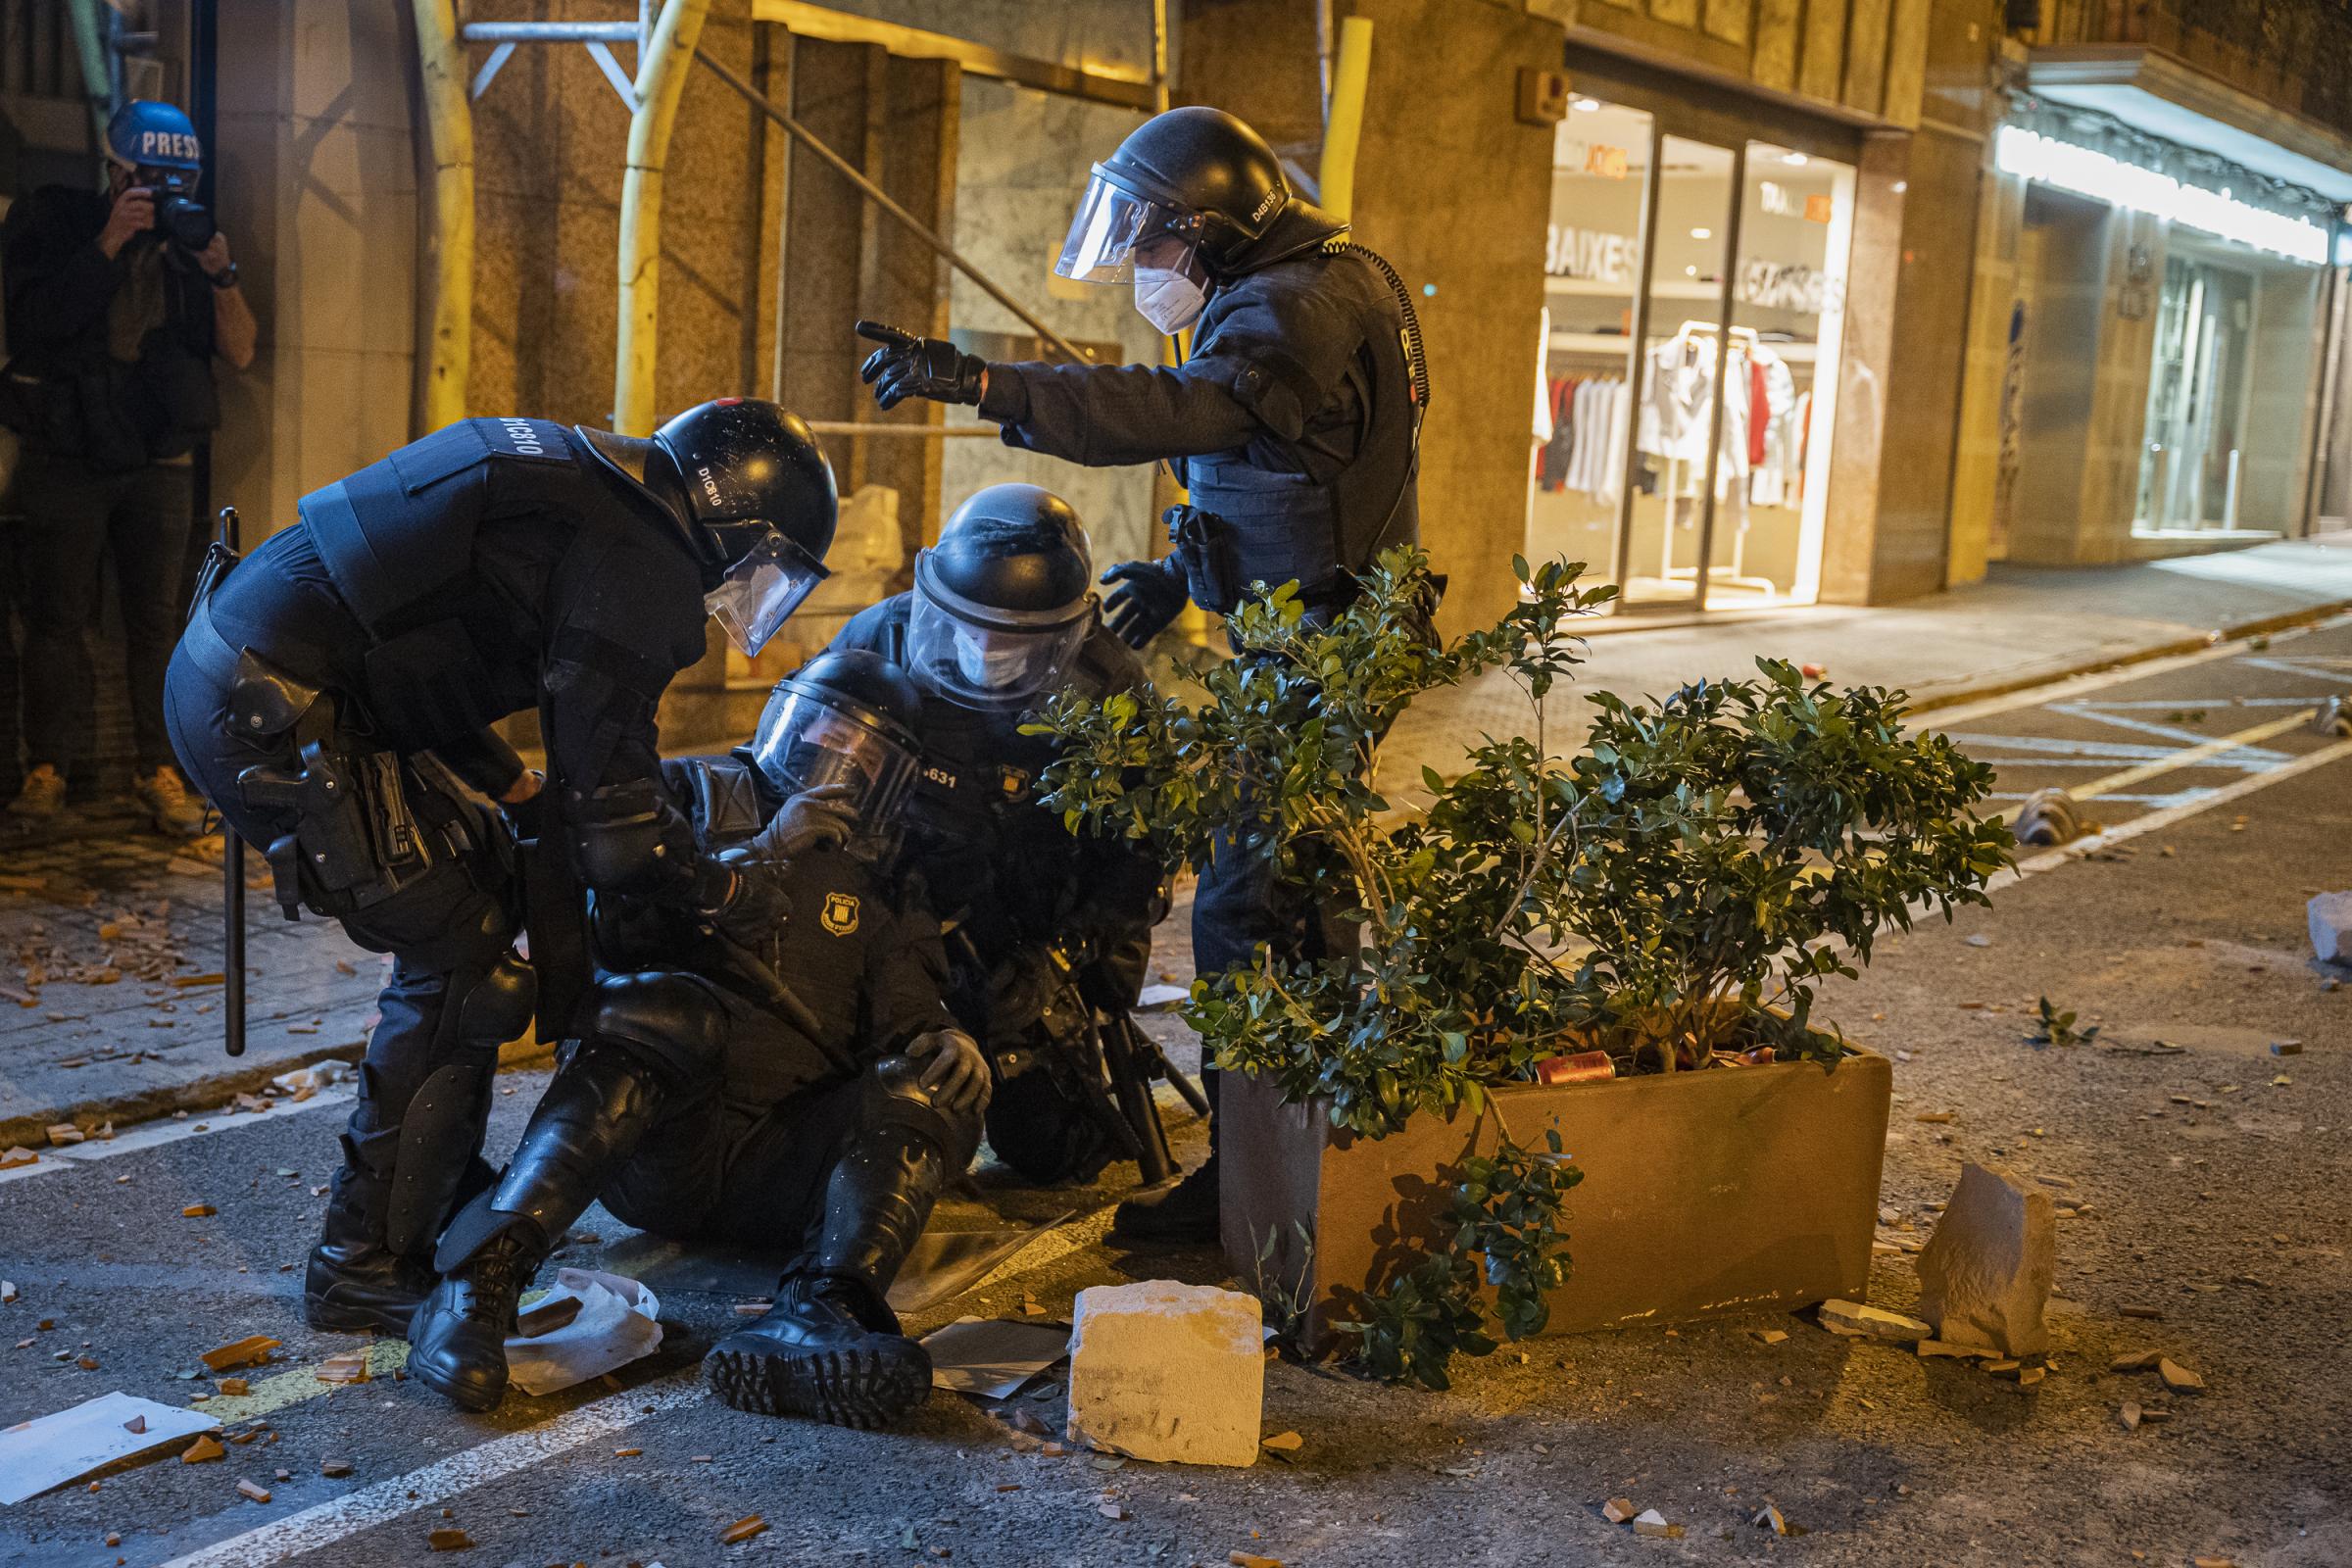 Agents of the Mossos de Esquadra rescue a colleague injured during the riots.